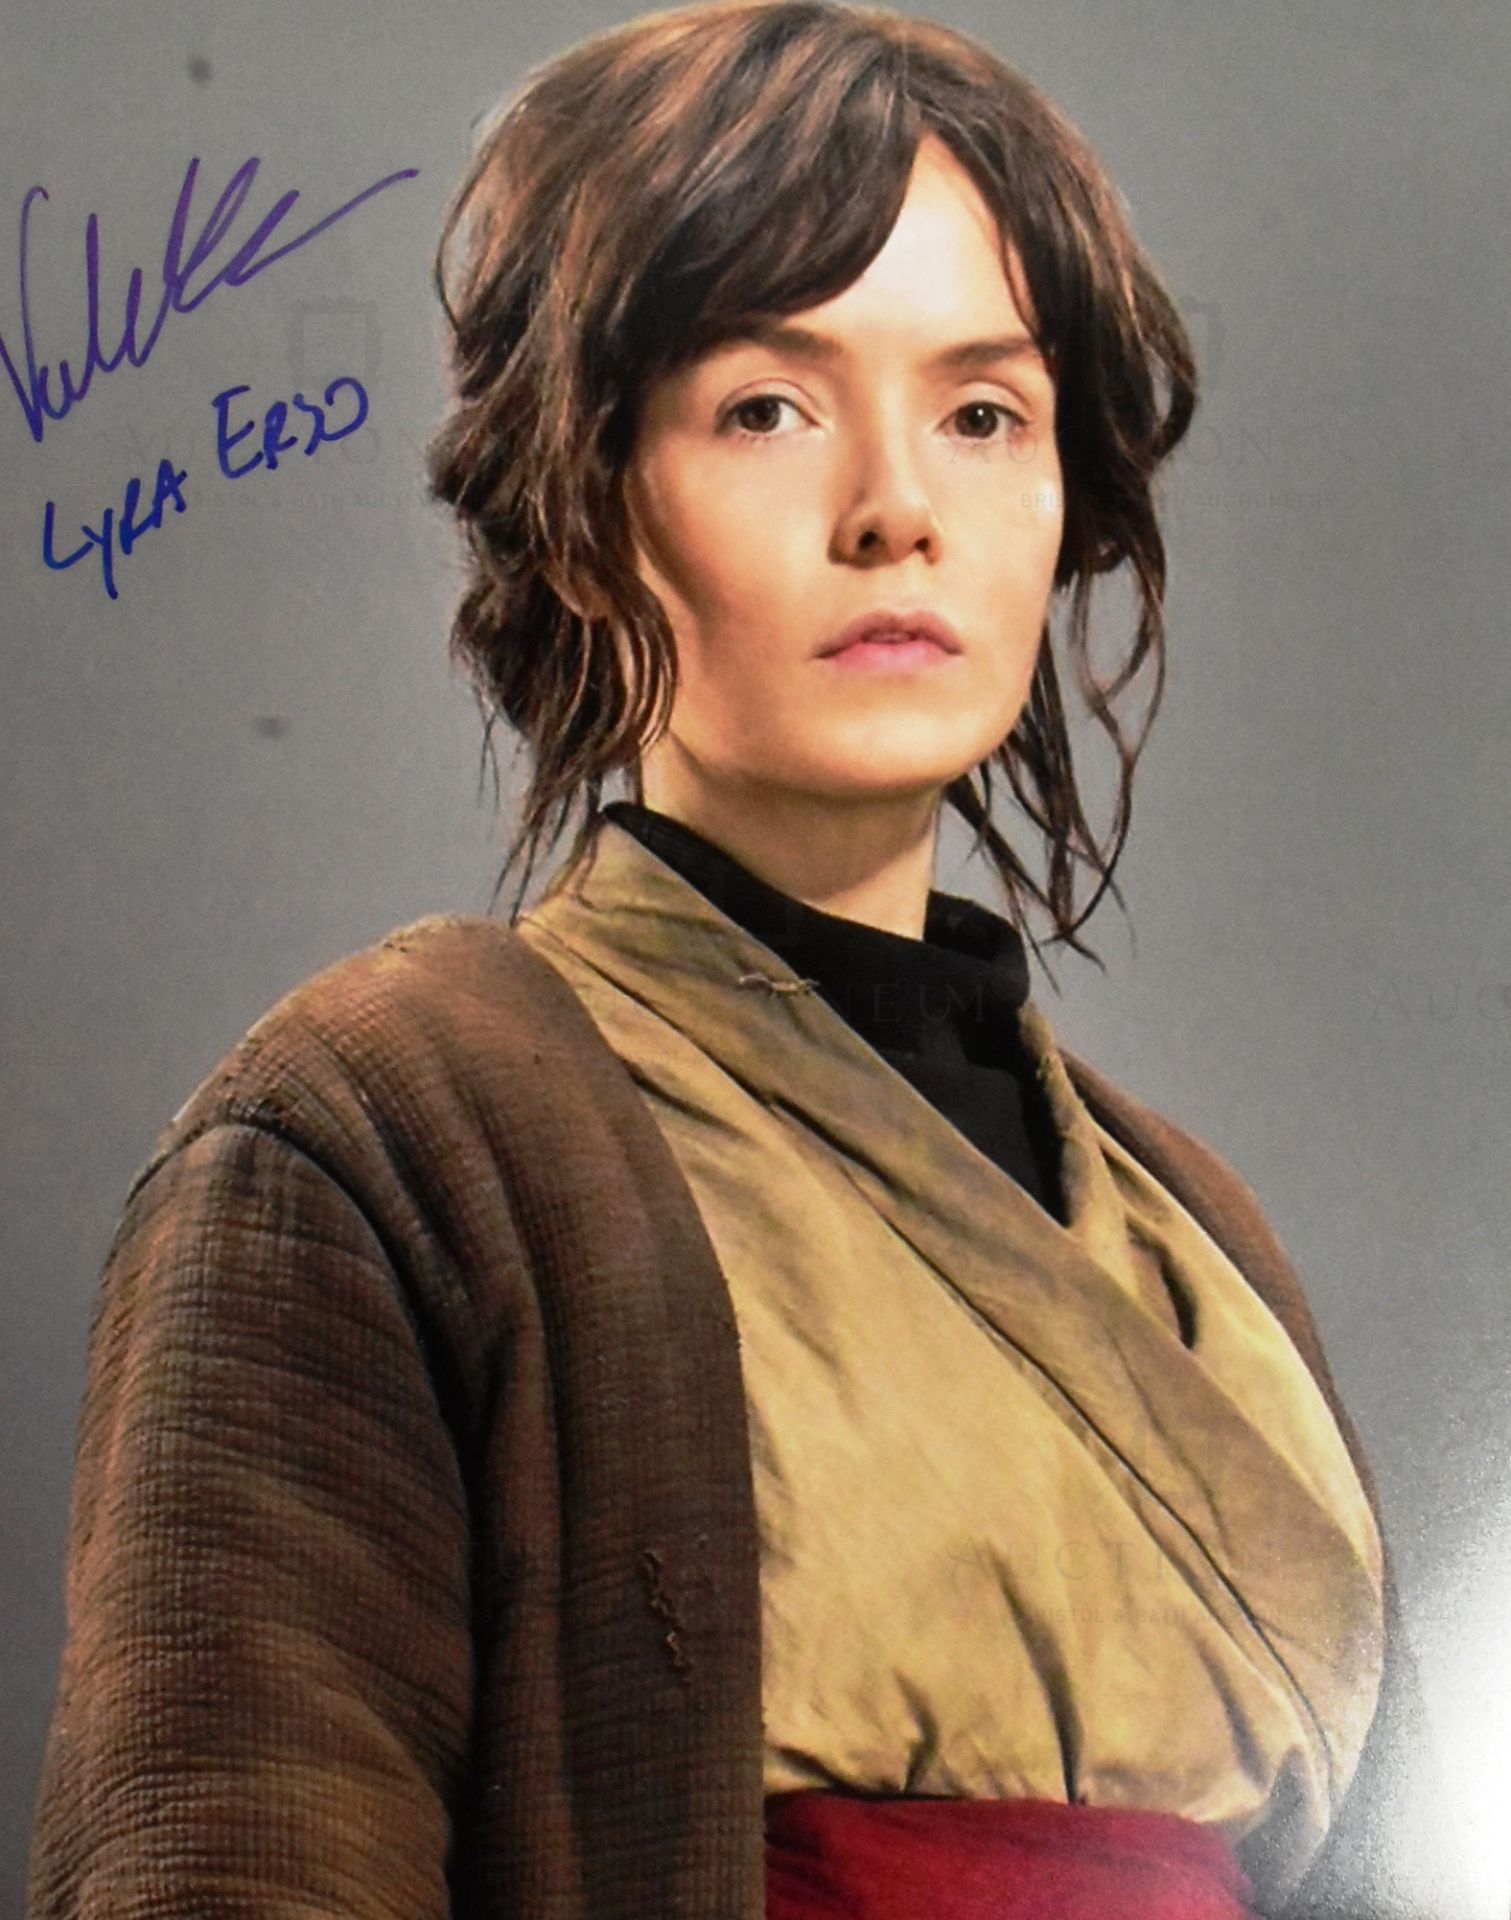 STAR WARS - ROGUE ONE / DISNEY TRILOGY - COLLECTION OF AUTOGRAPHS - Image 6 of 7